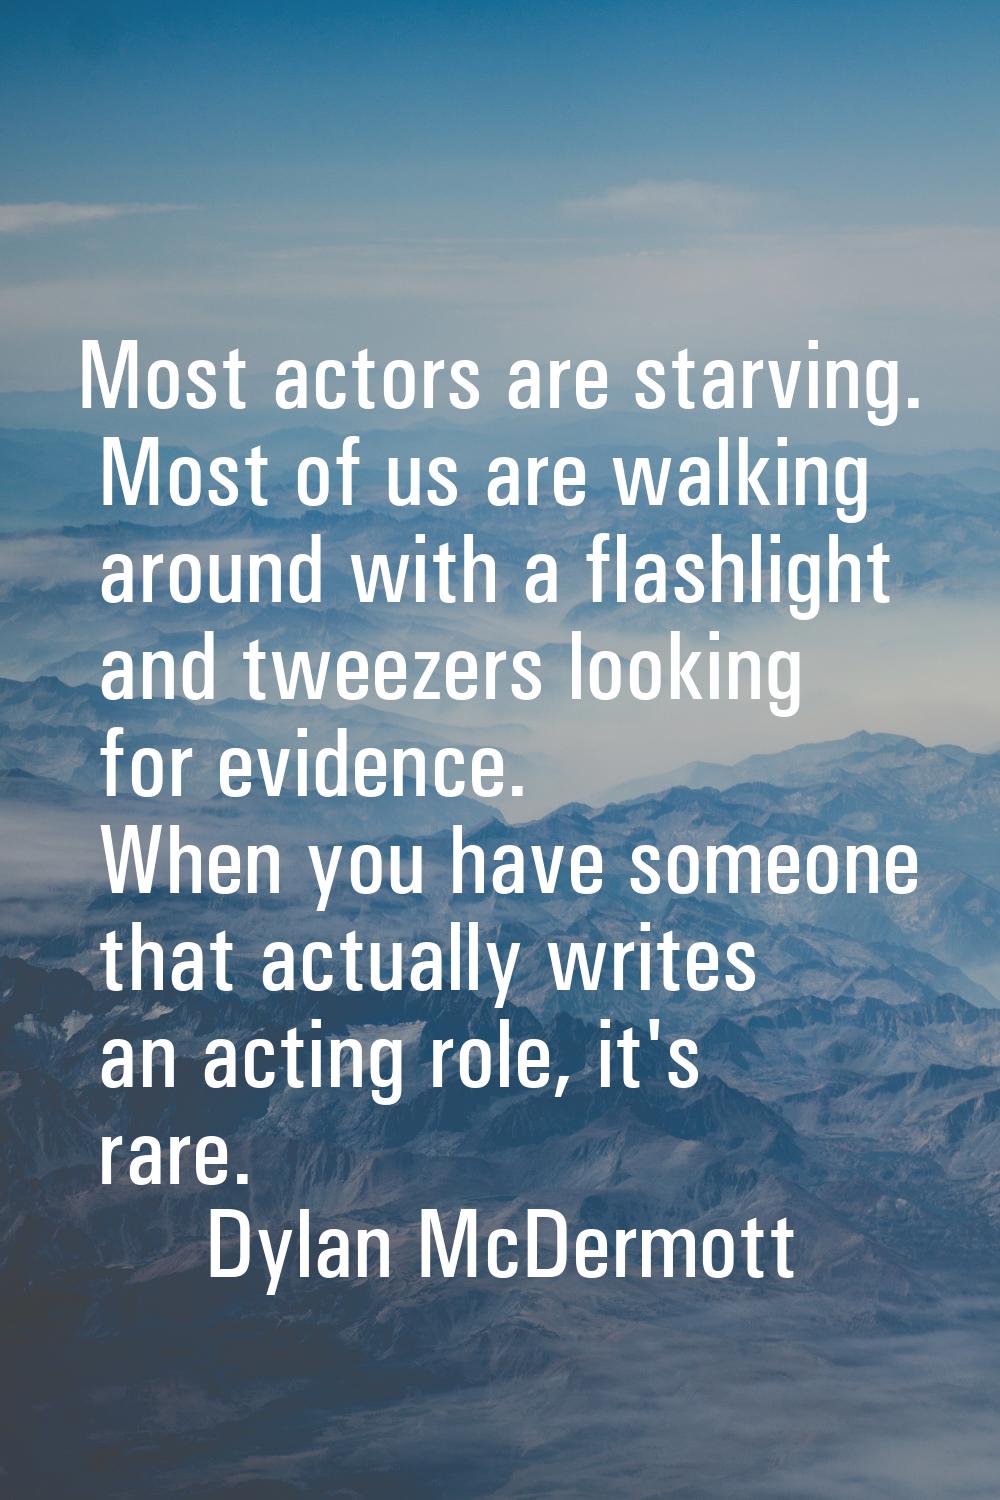 Most actors are starving. Most of us are walking around with a flashlight and tweezers looking for 